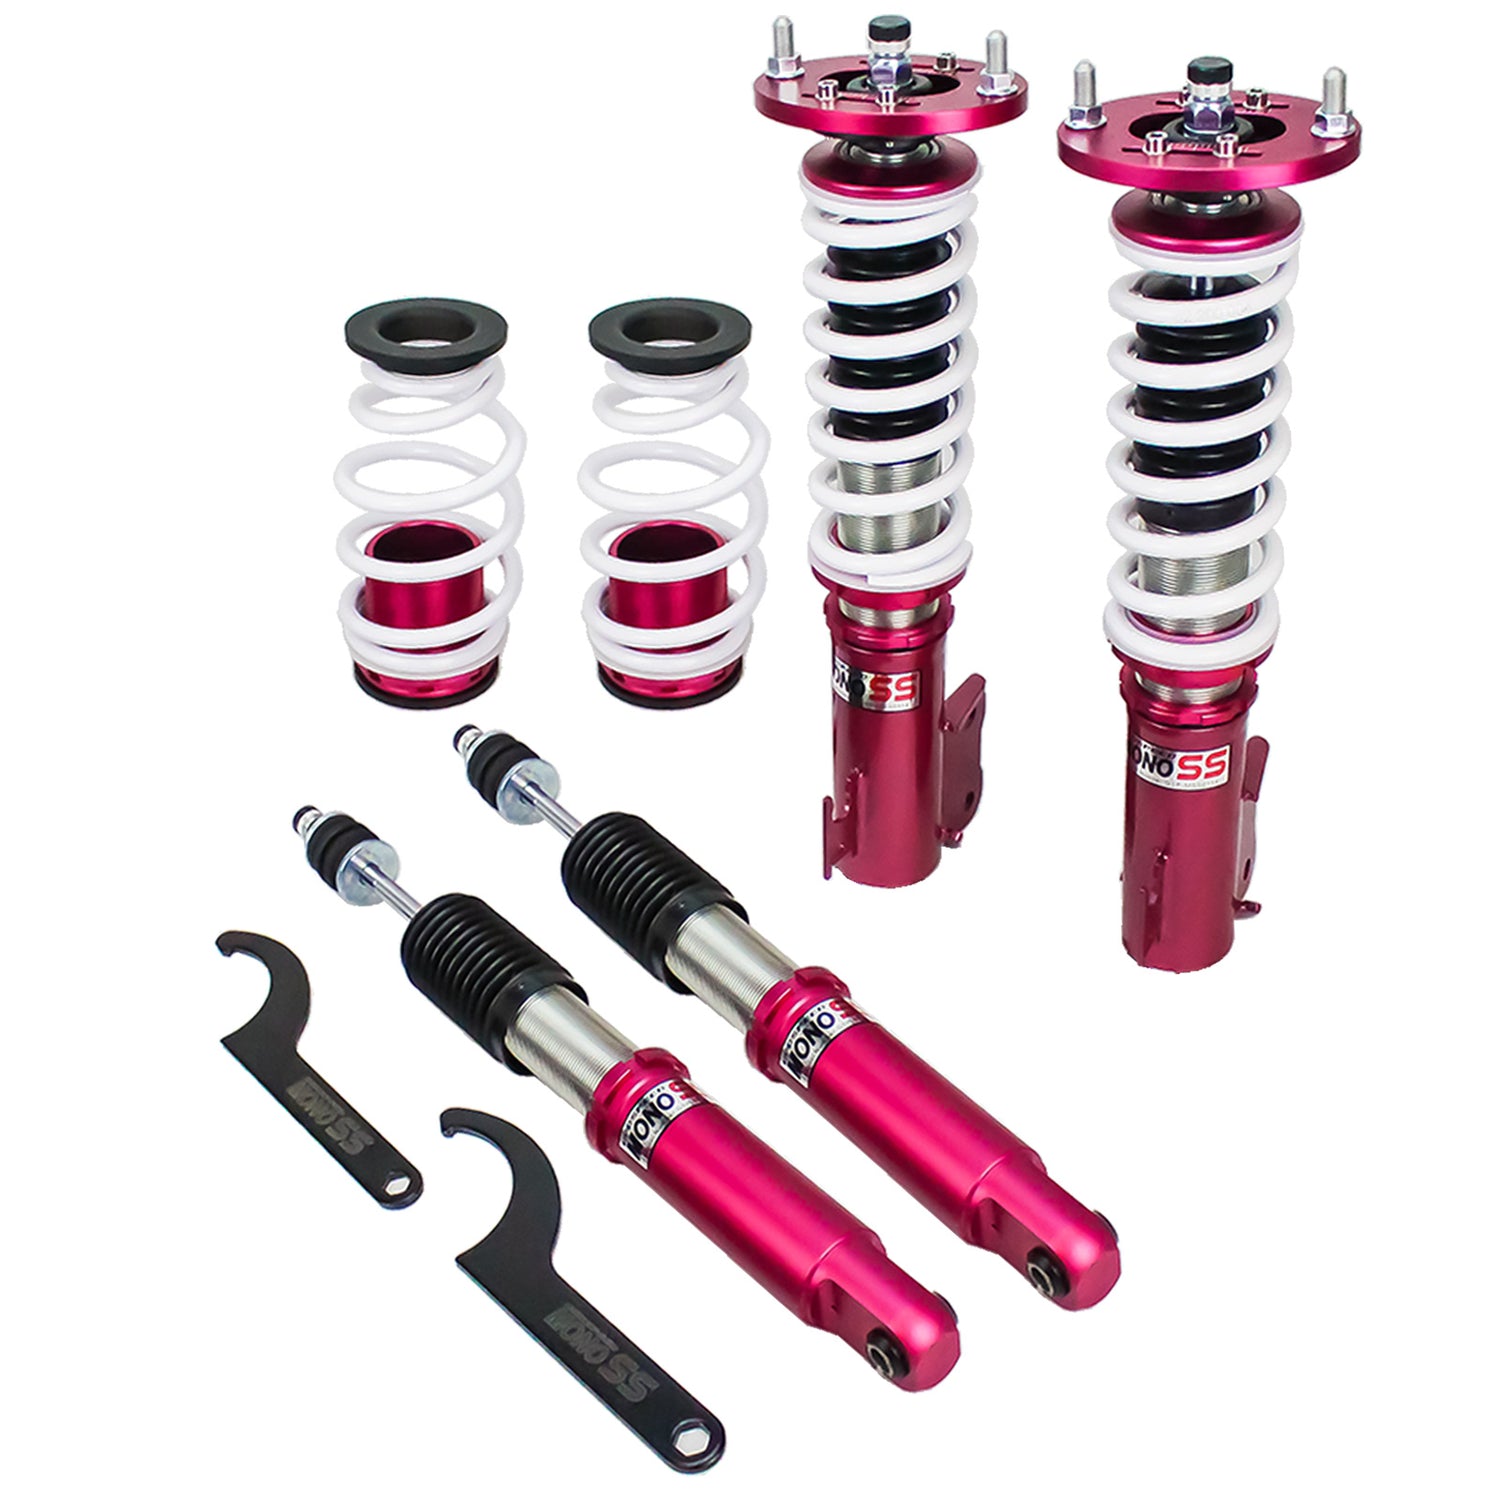 Godspeed MSS0114-B MonoSS Coilover Lowering Kit, Fully Adjustable, Ride Height, Spring Tension And 16 Click Damping, Mitsubishi Mirage Sedan(A131A) 2015+UP